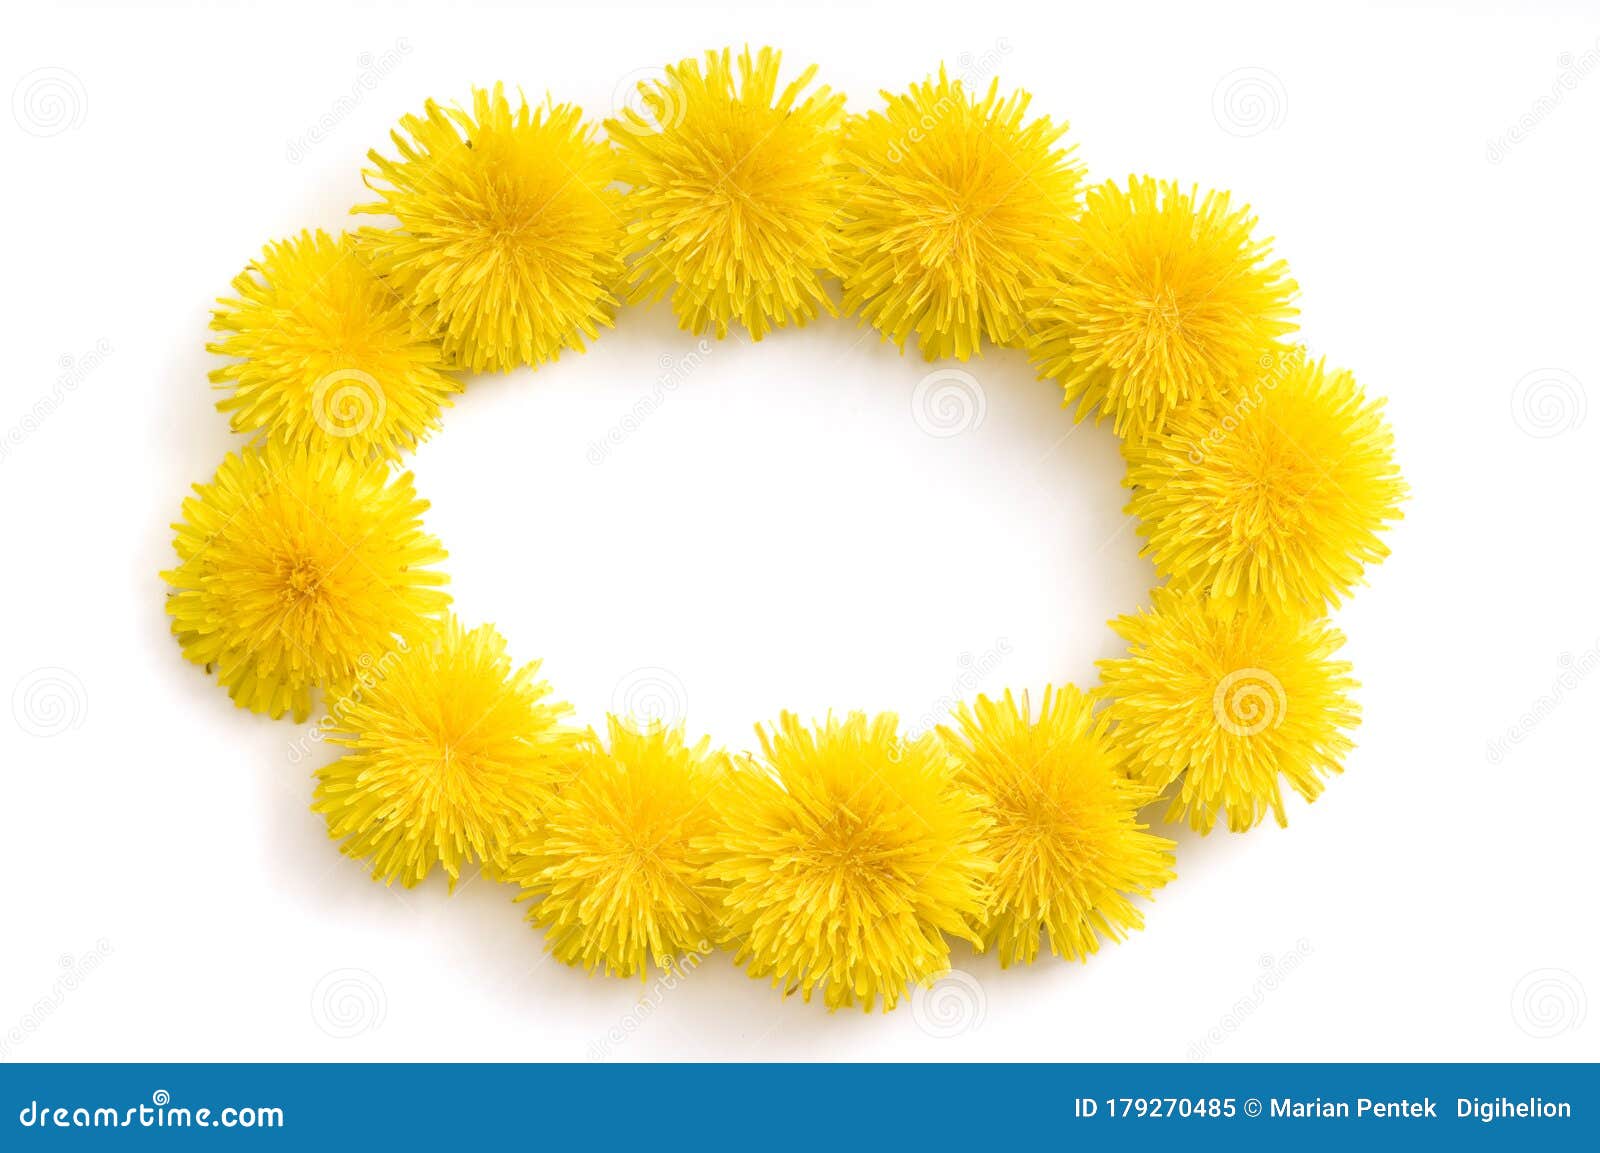 elipse-d frame made of fresh yellow dandelion flowers on white background.